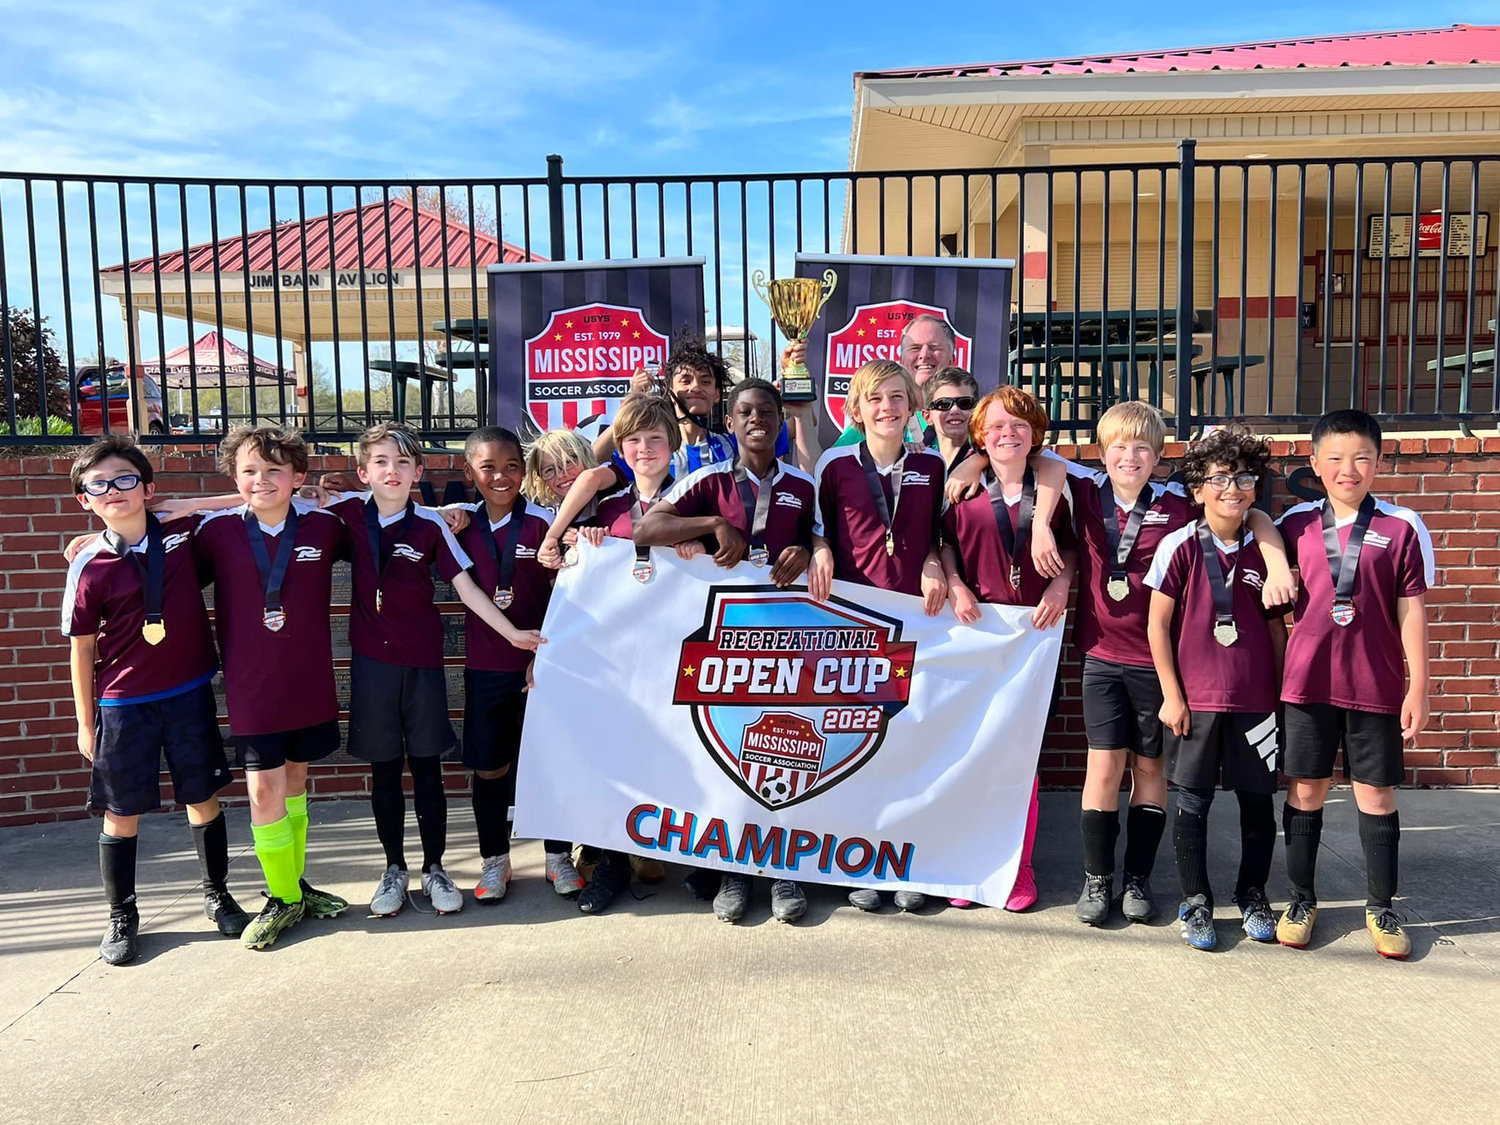 The Maroon Power Rangers pose after winning the U-12 Boys Division of the Mississippi Soccer Association's Recreational Open Cup 2022. Pictured, from left: Ian Zhang, Haden Mote, Michael Kramen, Laurence Stamps, McKellar Goff, Silas Luckett, Wilson Morataya (Assistant Coach), Correy Elder, Talon Gust,  Kevin Crothers (Head Coach), Brendan Campbell, Quest Crothers, Solomon Voborsky, Jude Jamileh, Lemuel Shi.